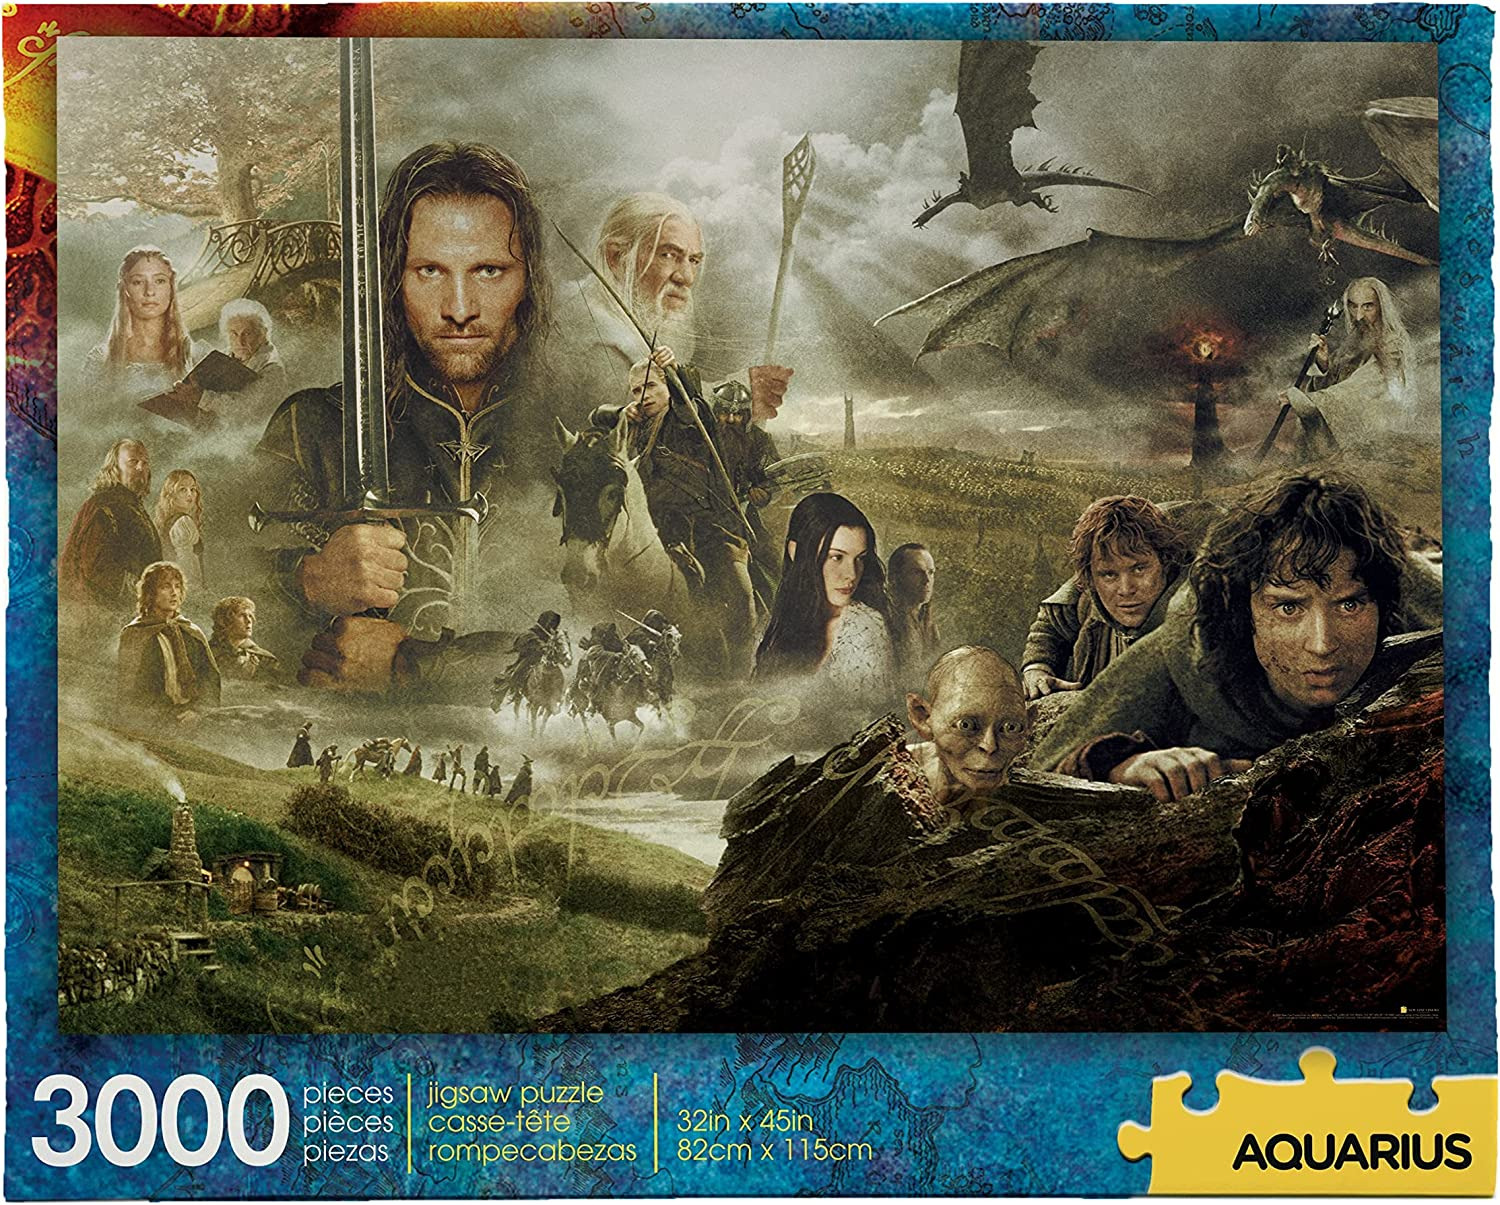 Aquarius Lord of the Rings (3000 Piece Jigsaw Puzzle) - Officially Licensed Lord